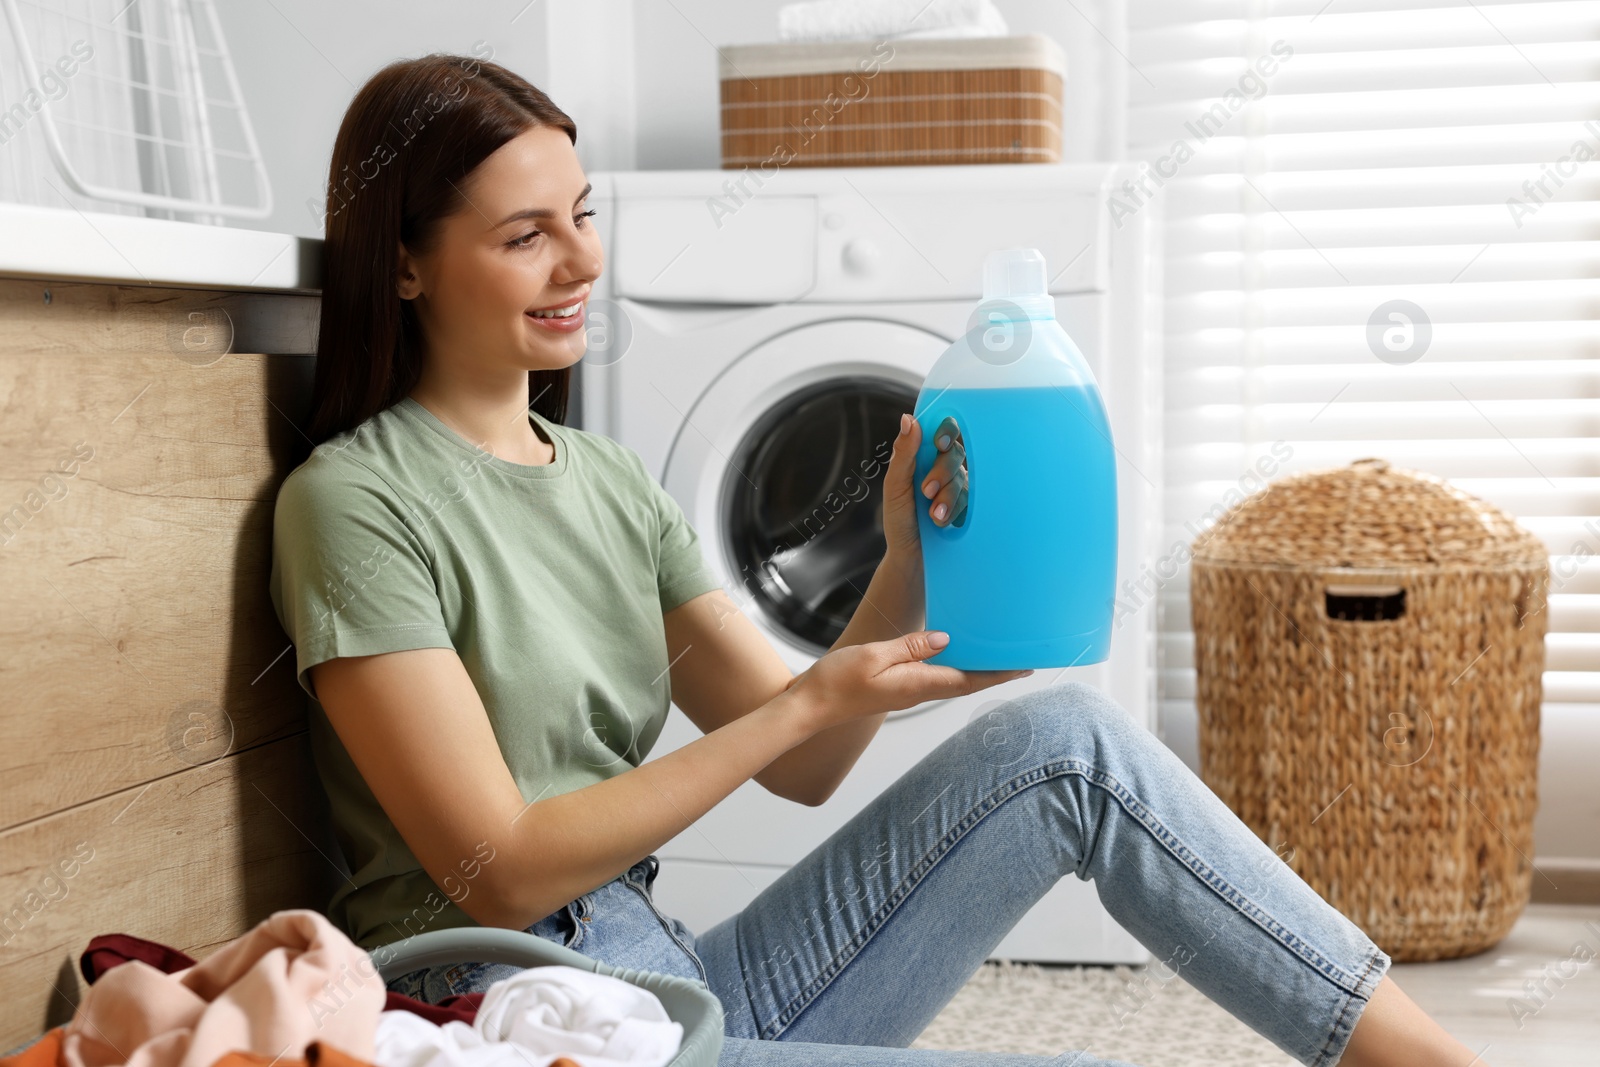 Photo of Woman sitting near washing machine and holding fabric softener in bathroom